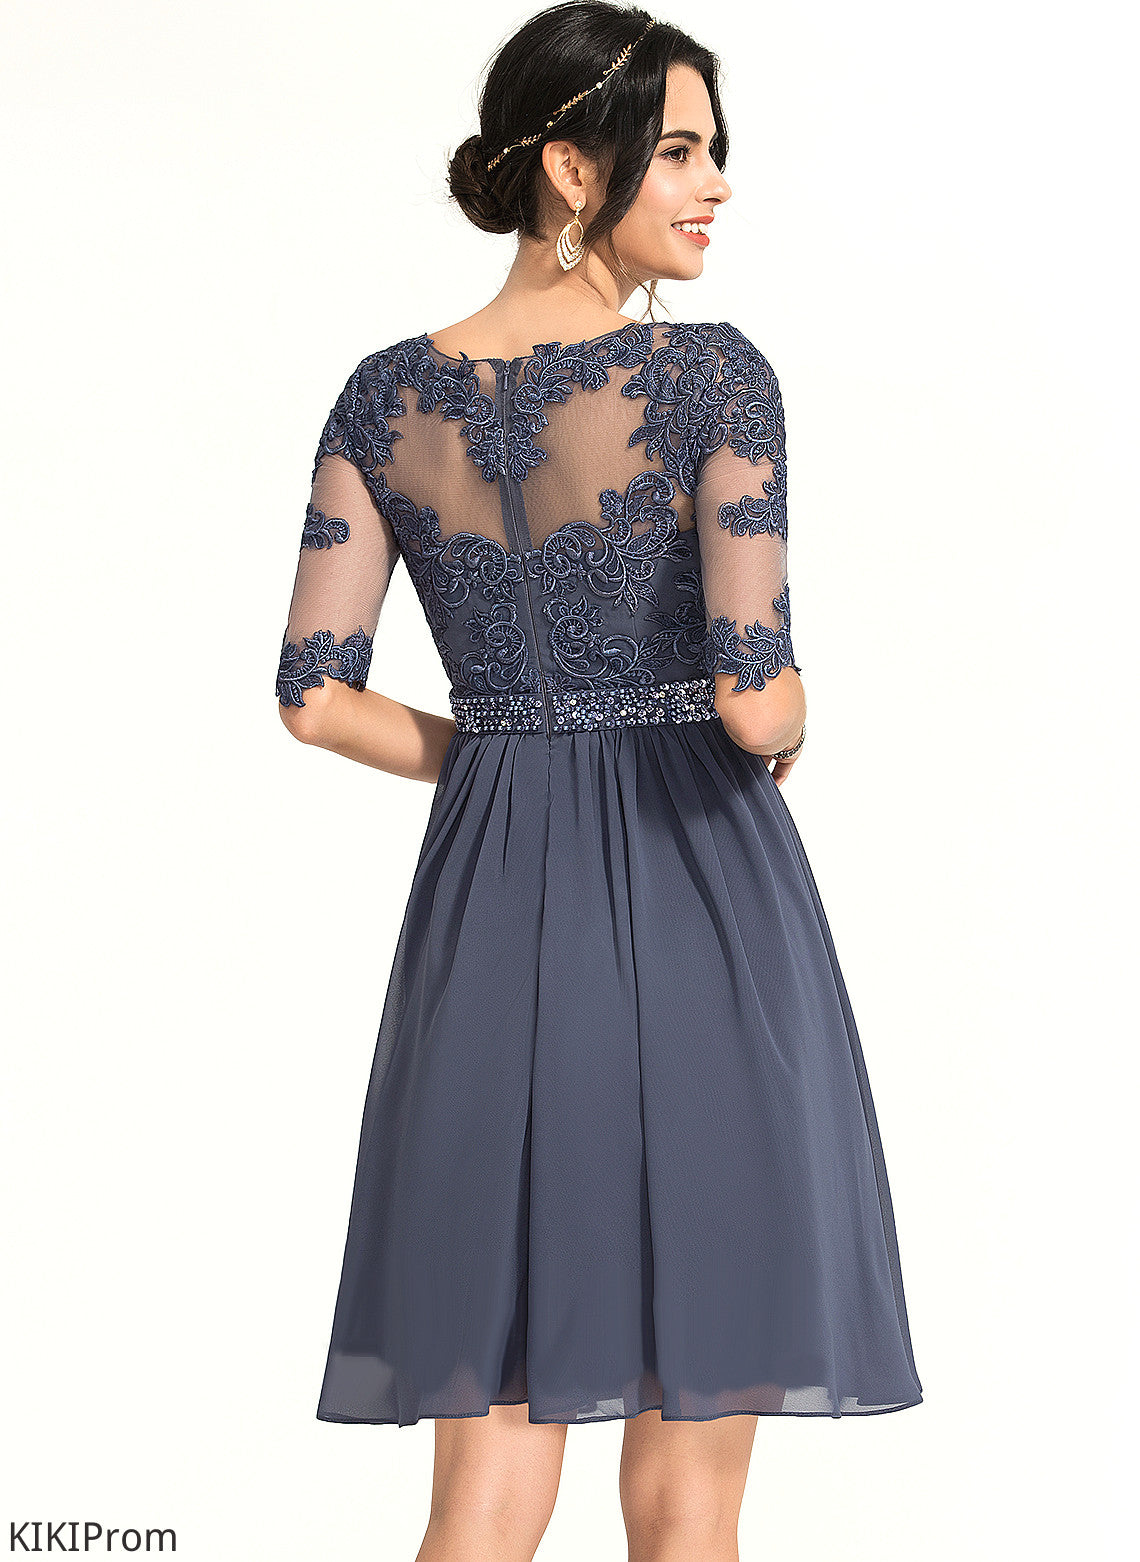 A-Line Neck Juliana Cocktail Knee-Length Cocktail Dresses Lace Chiffon Dress Scoop With Beading